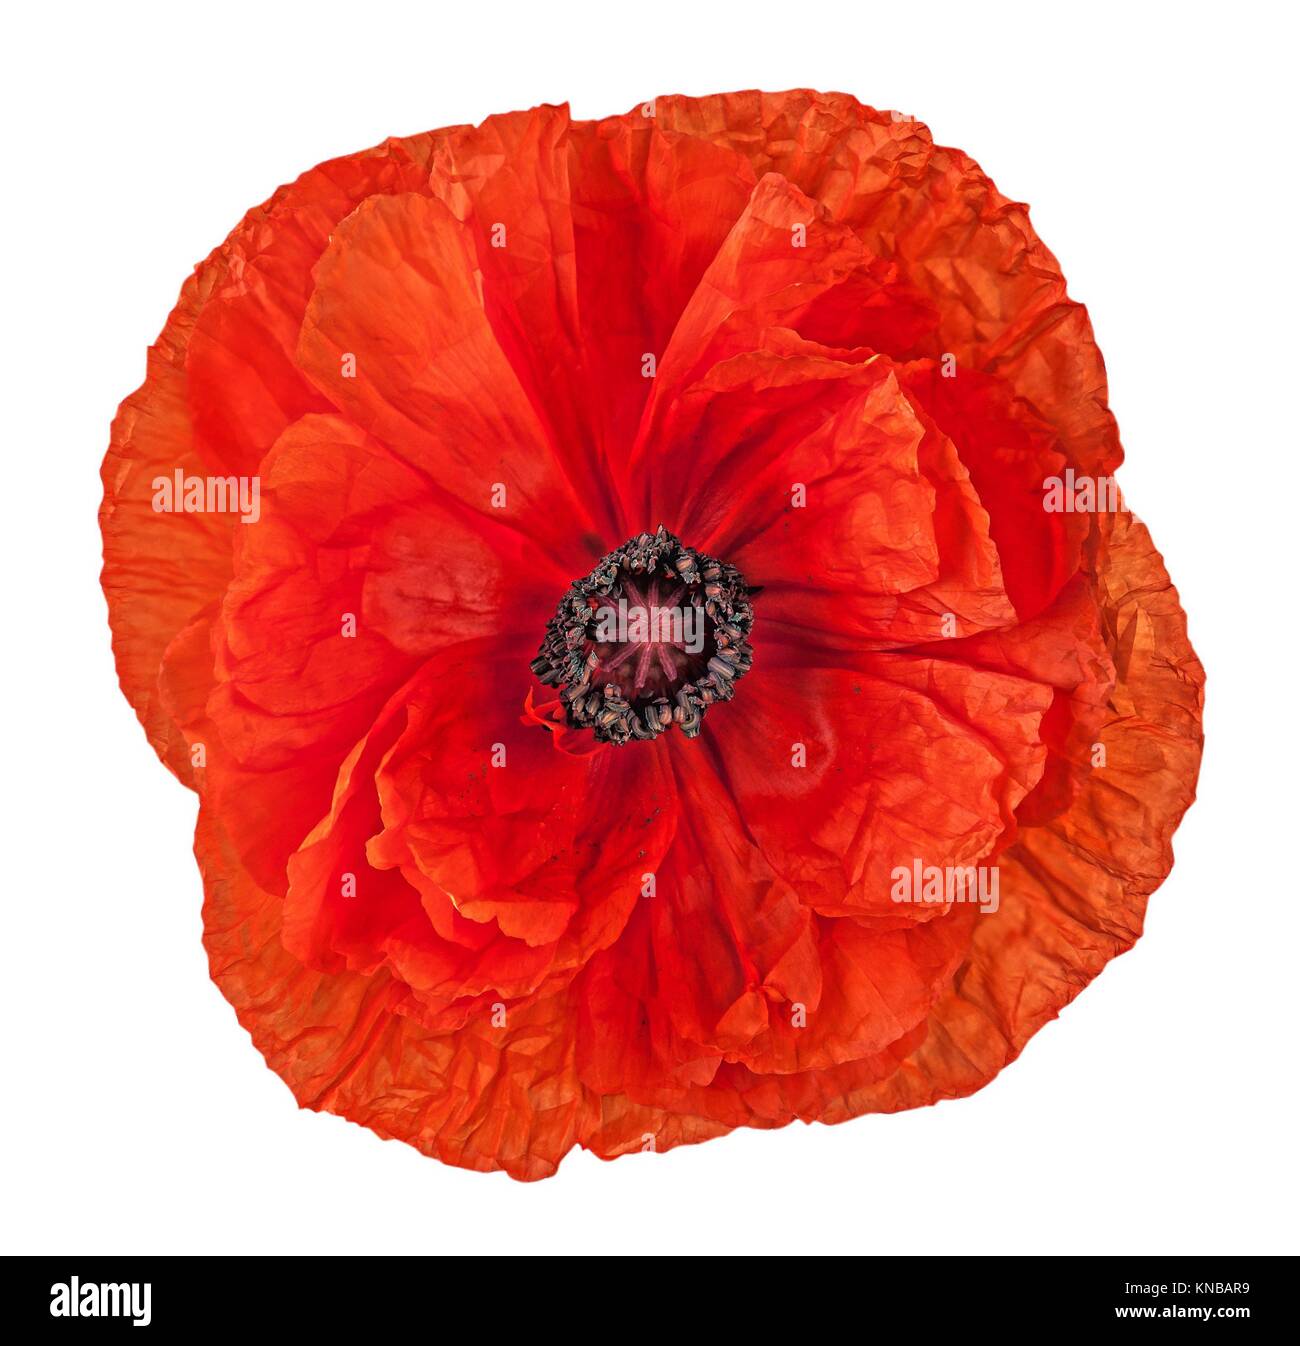 Closeup red poppy flower isolated on white background. Stock Photo